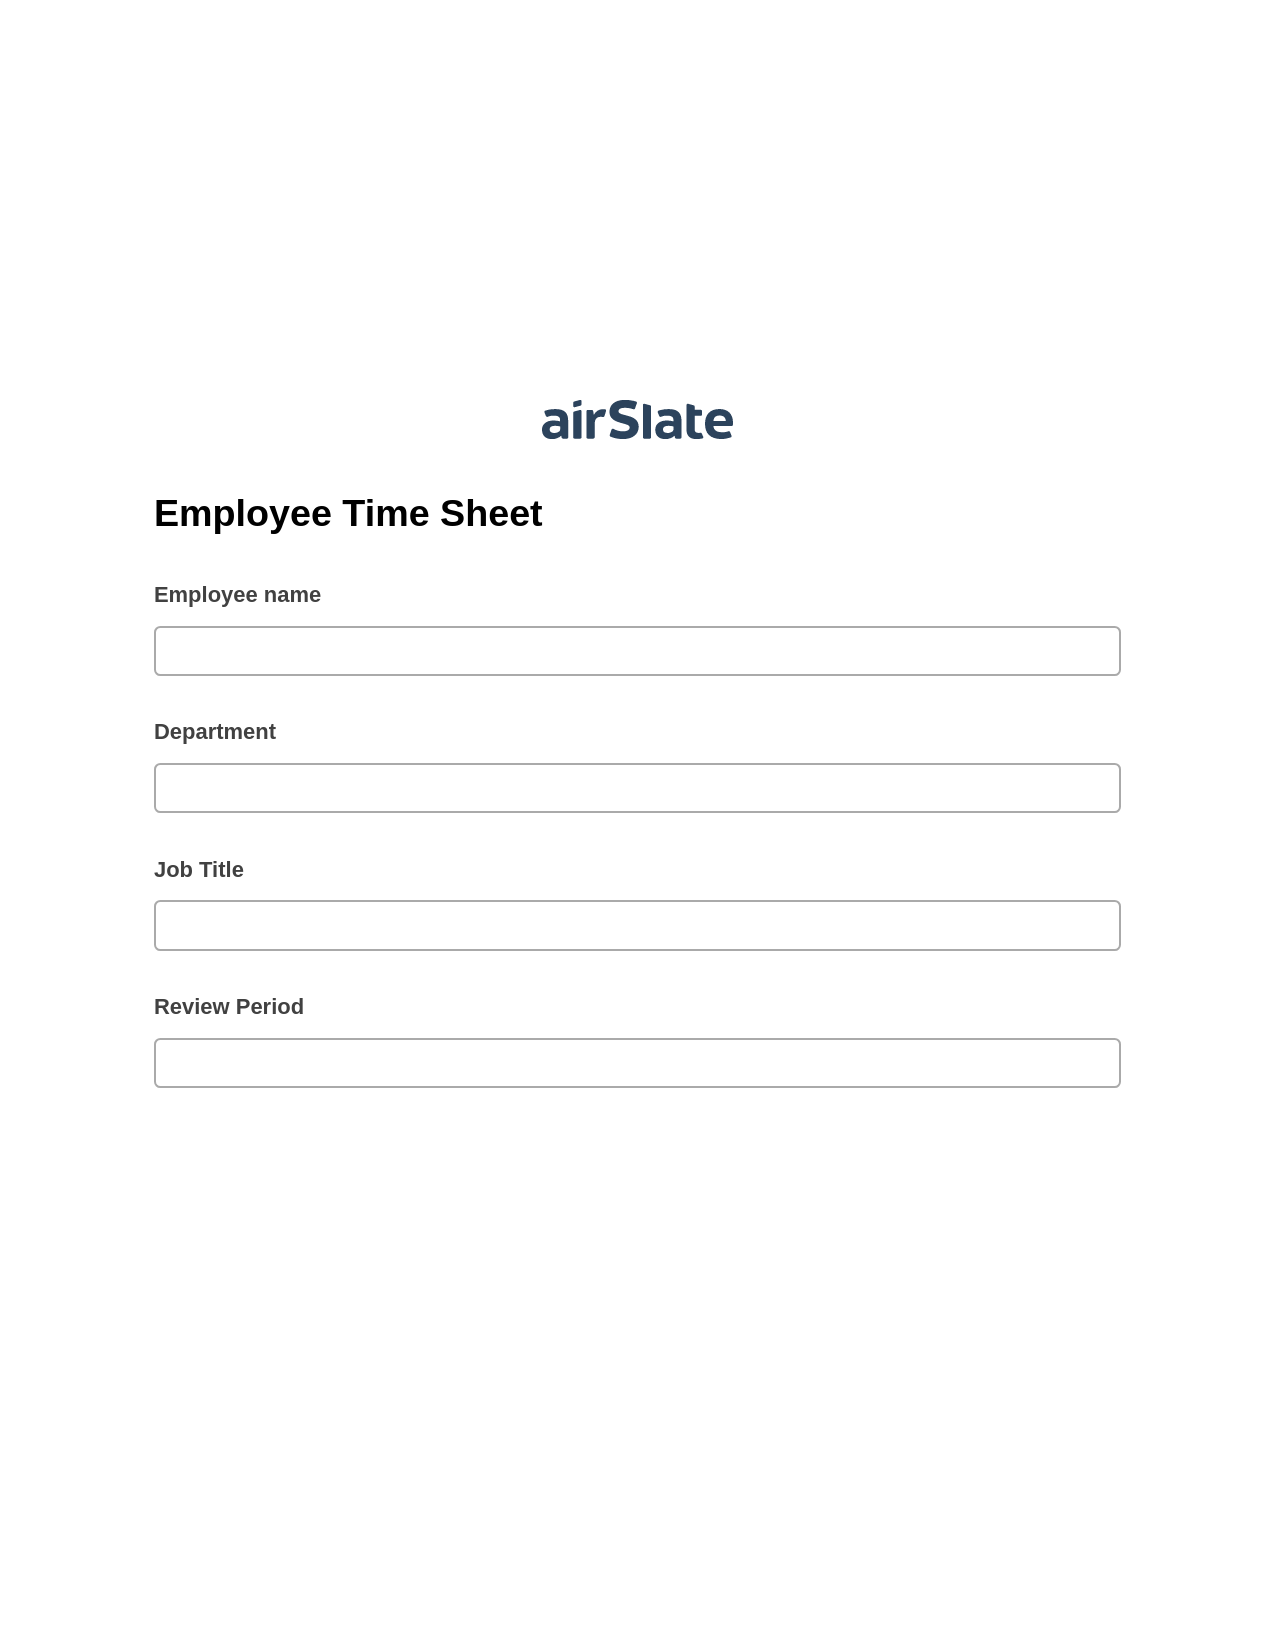 Employee Time Sheet Pre-fill from MySQL Bot, Send a Slate to Salesforce Contact Bot, Export to Excel 365 Bot